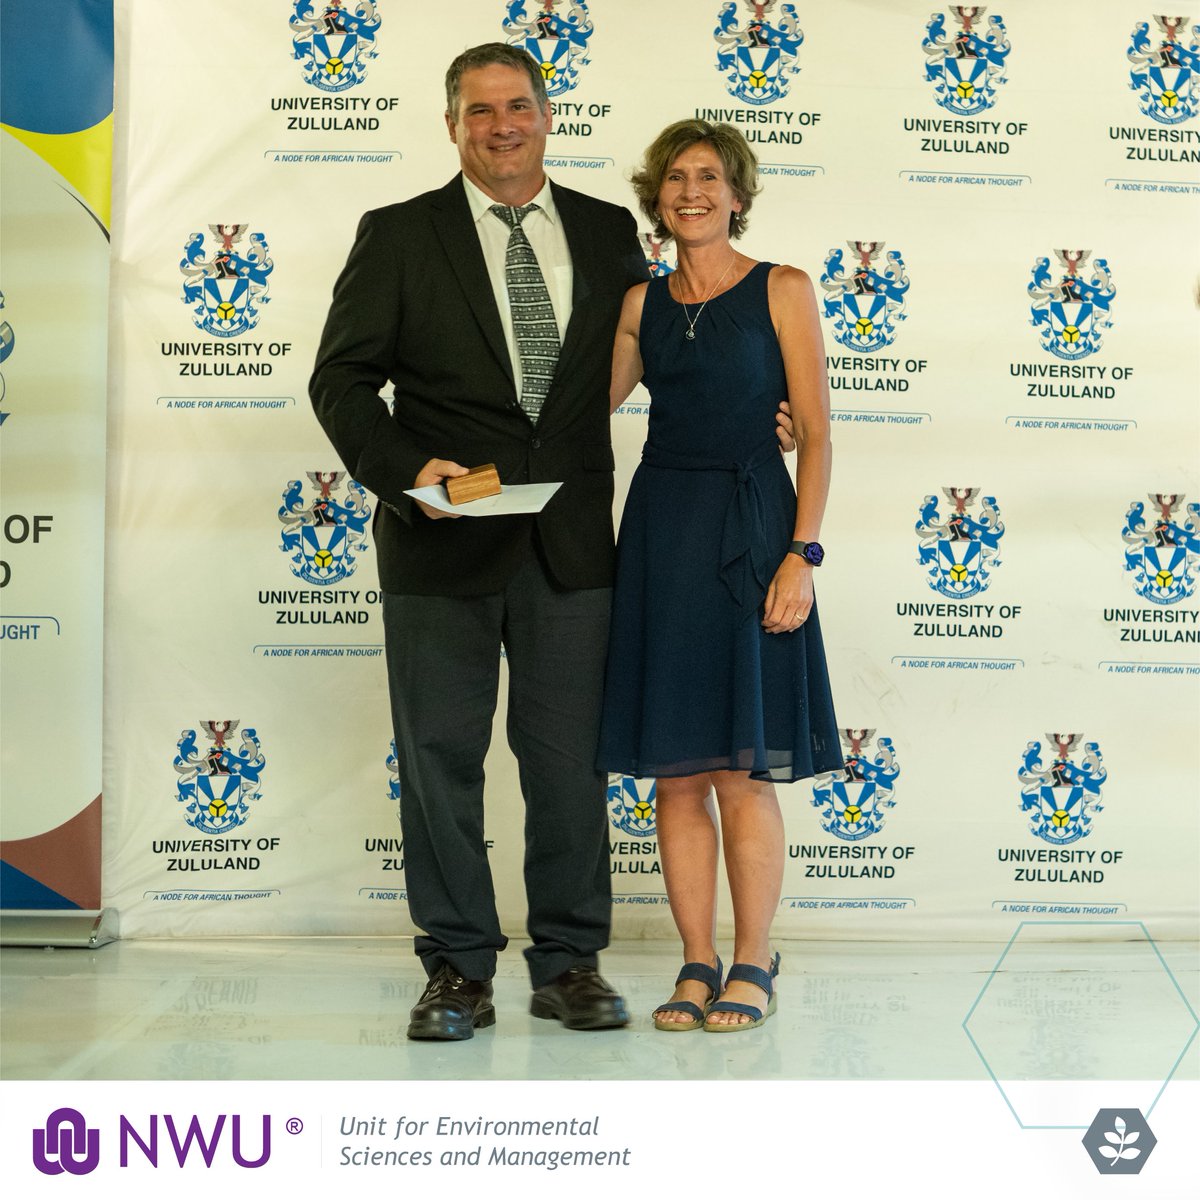 Prof. Stefan Siebert was awarded the SAAB Medal in recognition of his significant contributions to the field of Botany.

Congratulations Prof. Stefan, you inspire us!

More info: natural-sciences.nwu.ac.za/unit-environme… 

@theNWU #environmentalscience #botany #saab2024 #silvermedal #geoecology